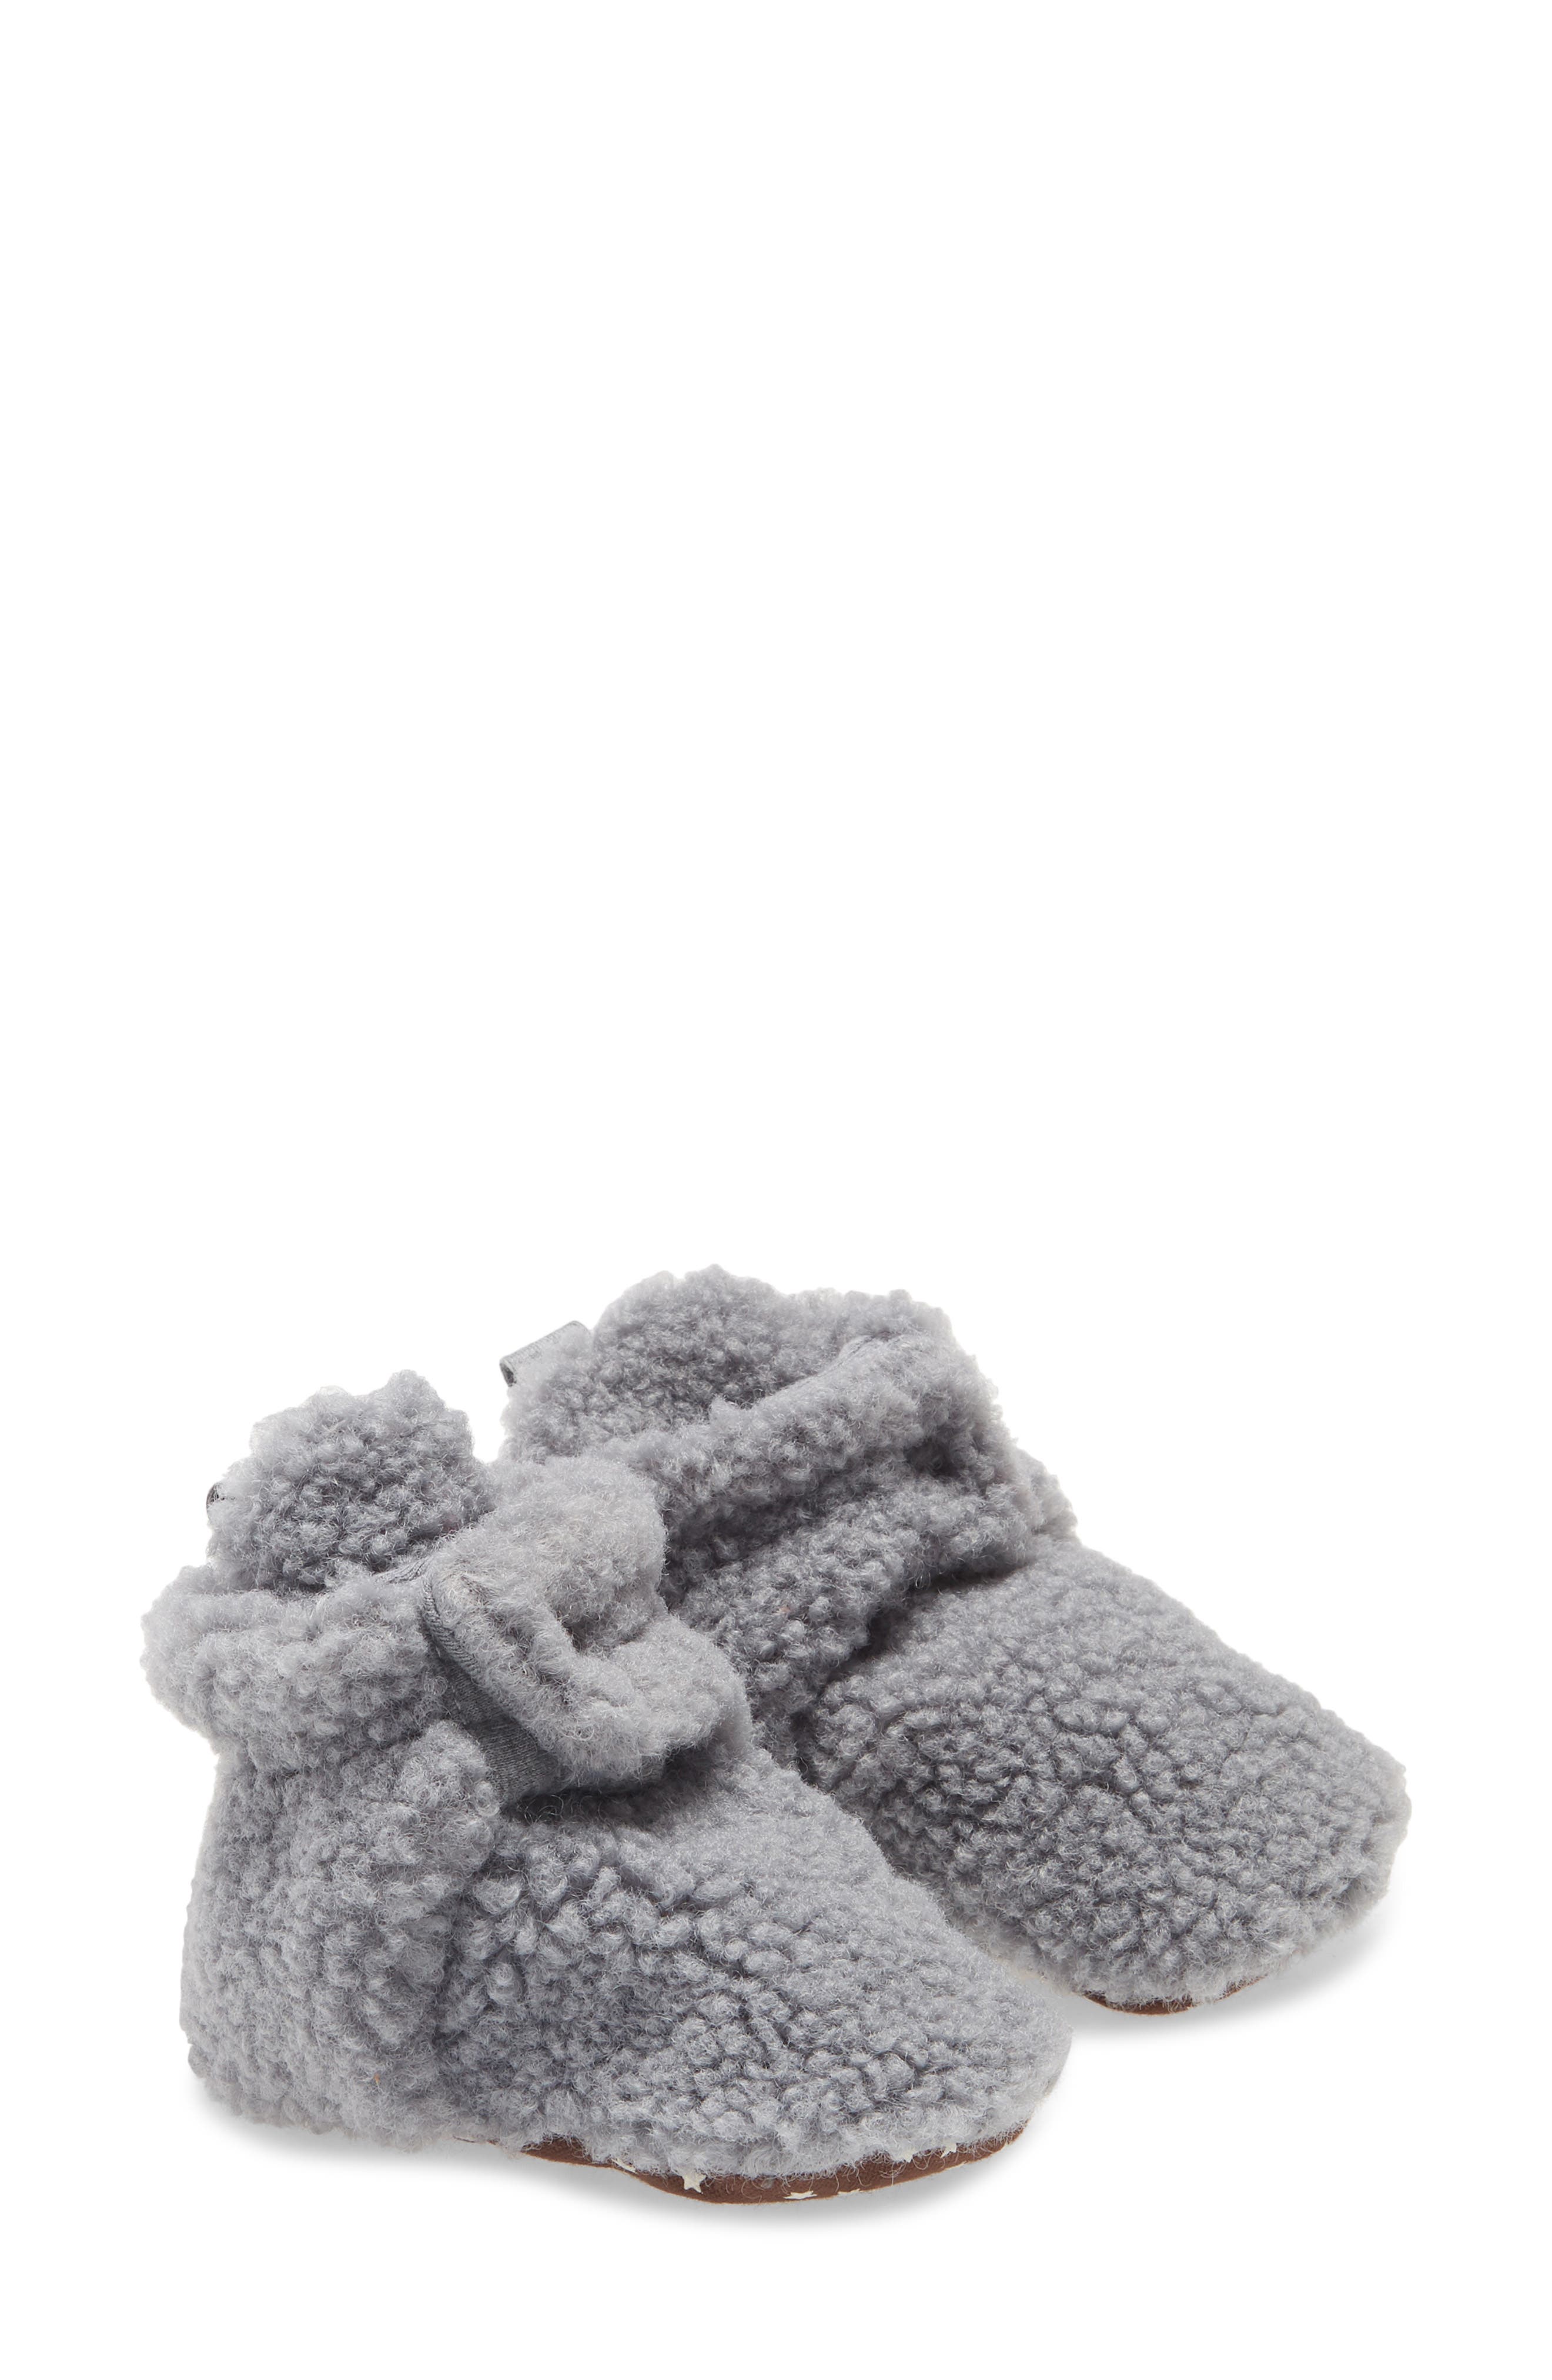 robeez slippers for toddlers